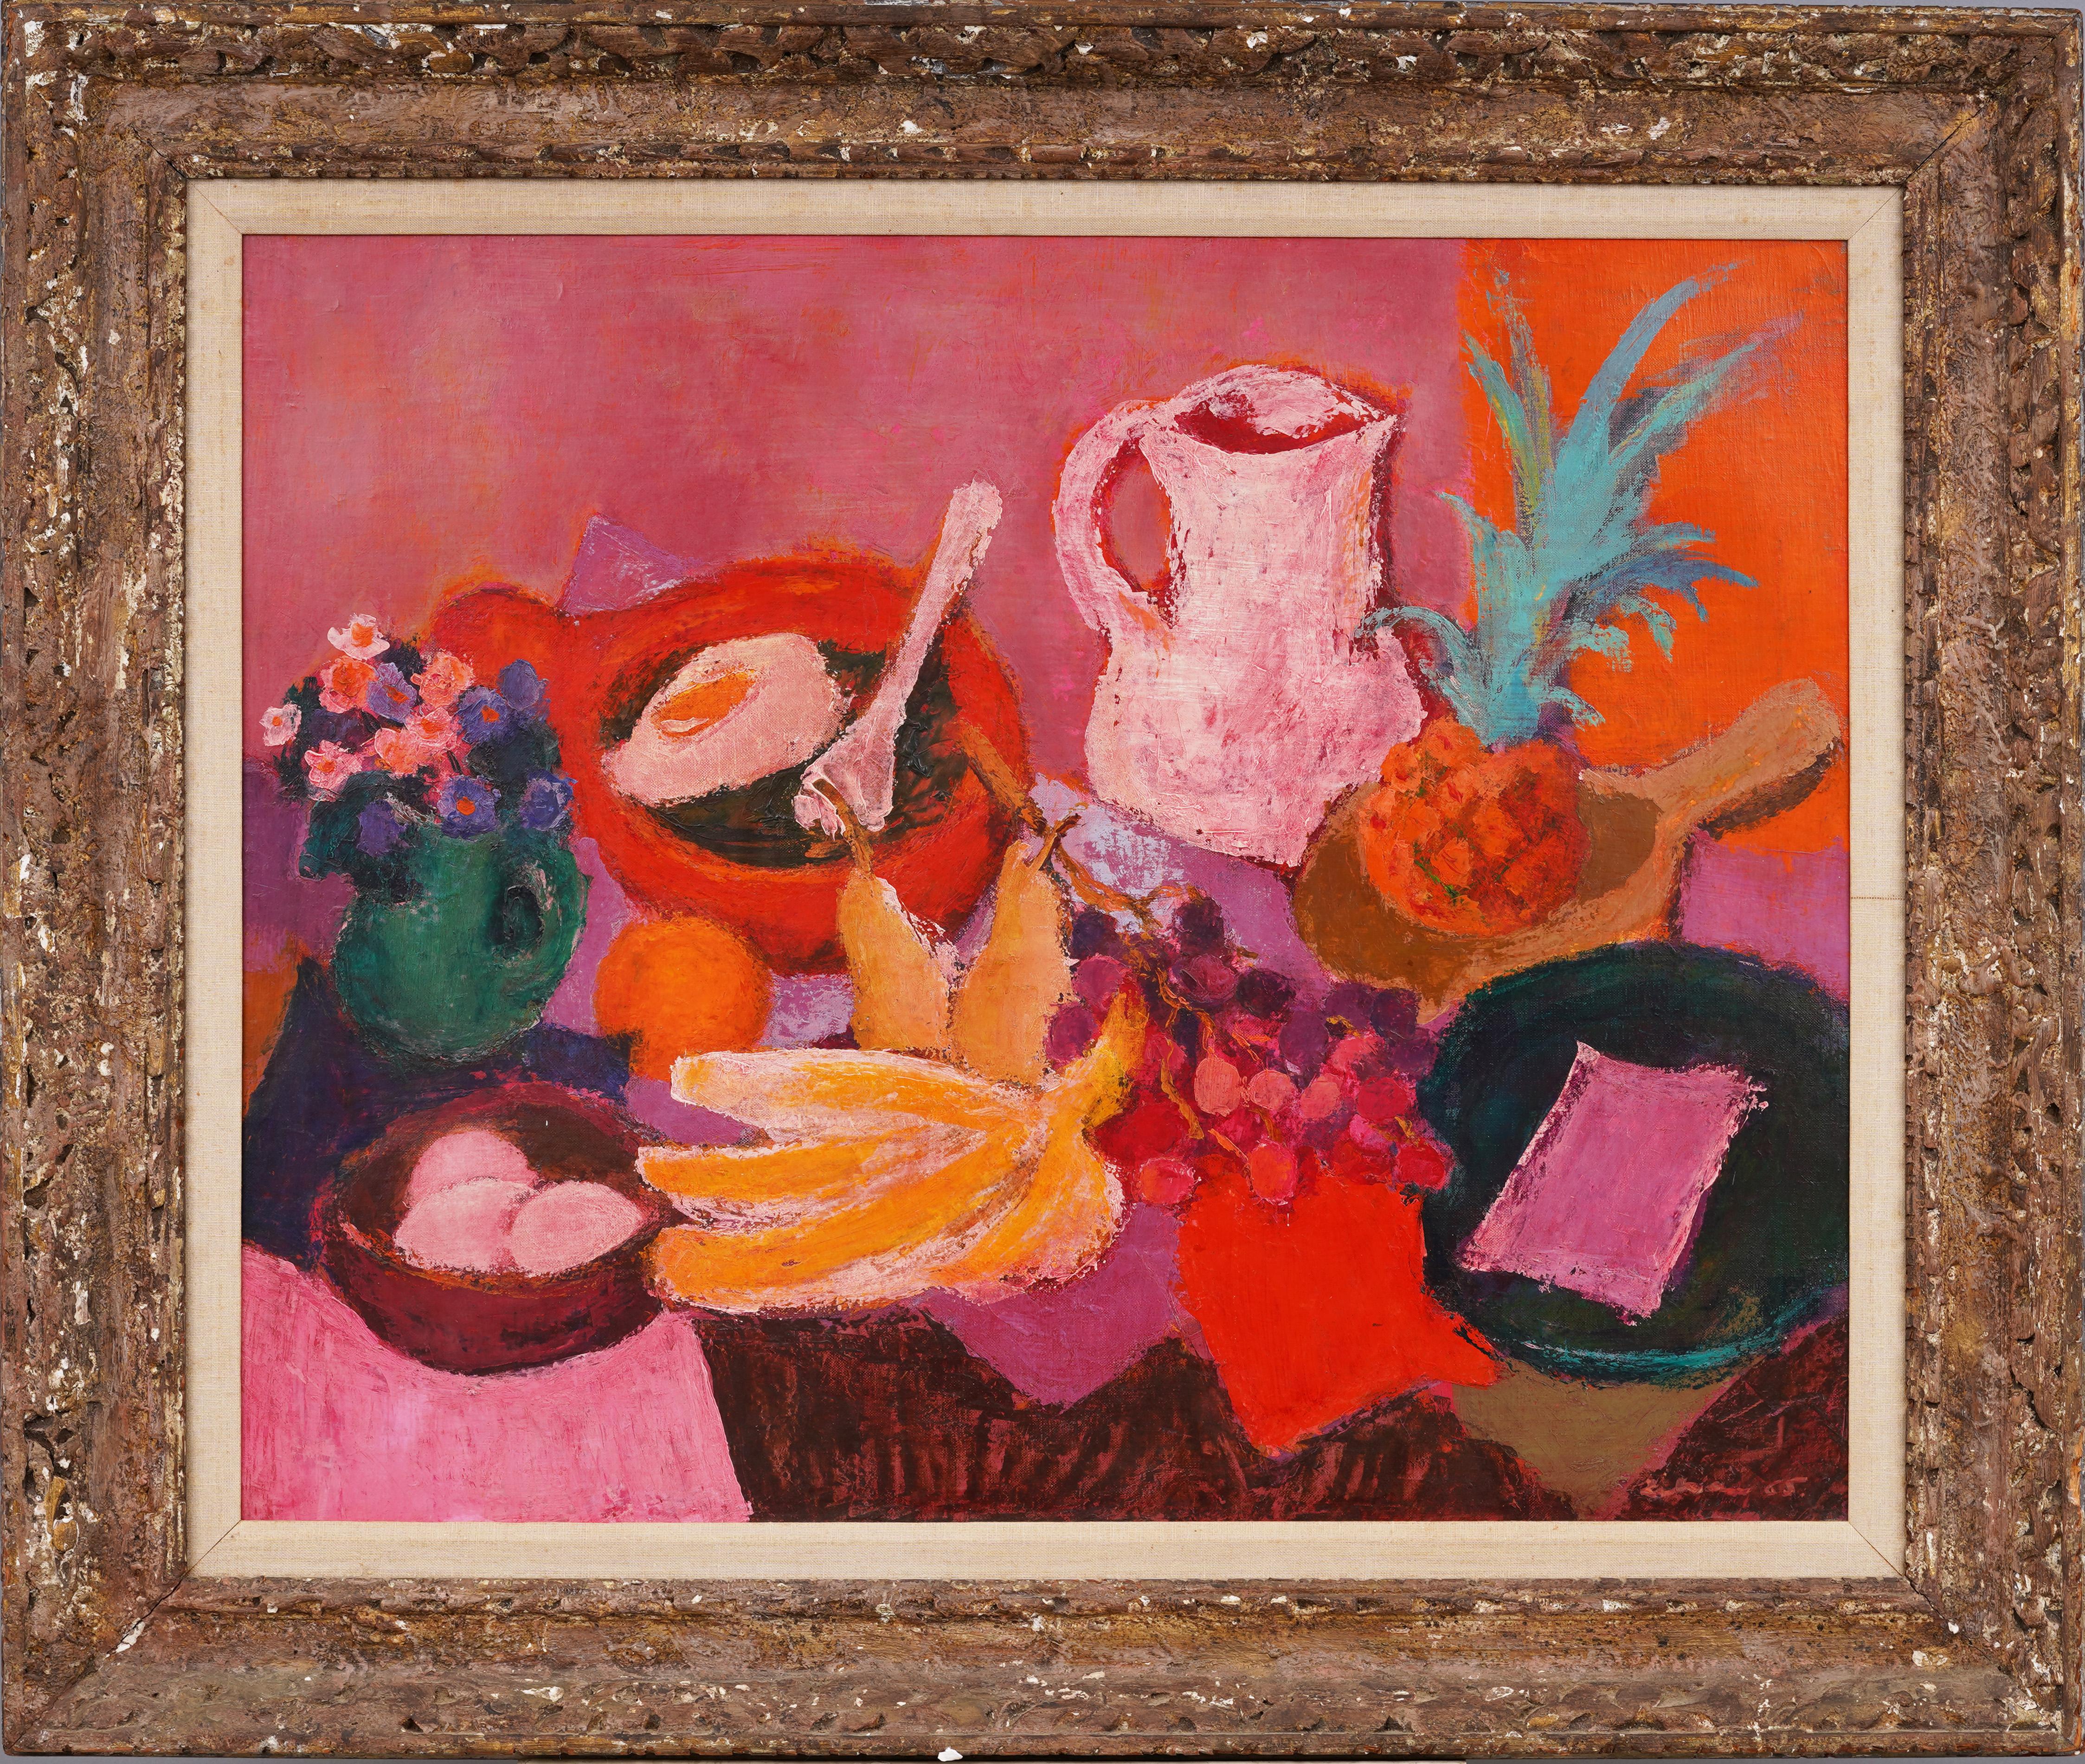 Antique American School Modernist Fauvist Interior Still Life Abstract Painting For Sale 1